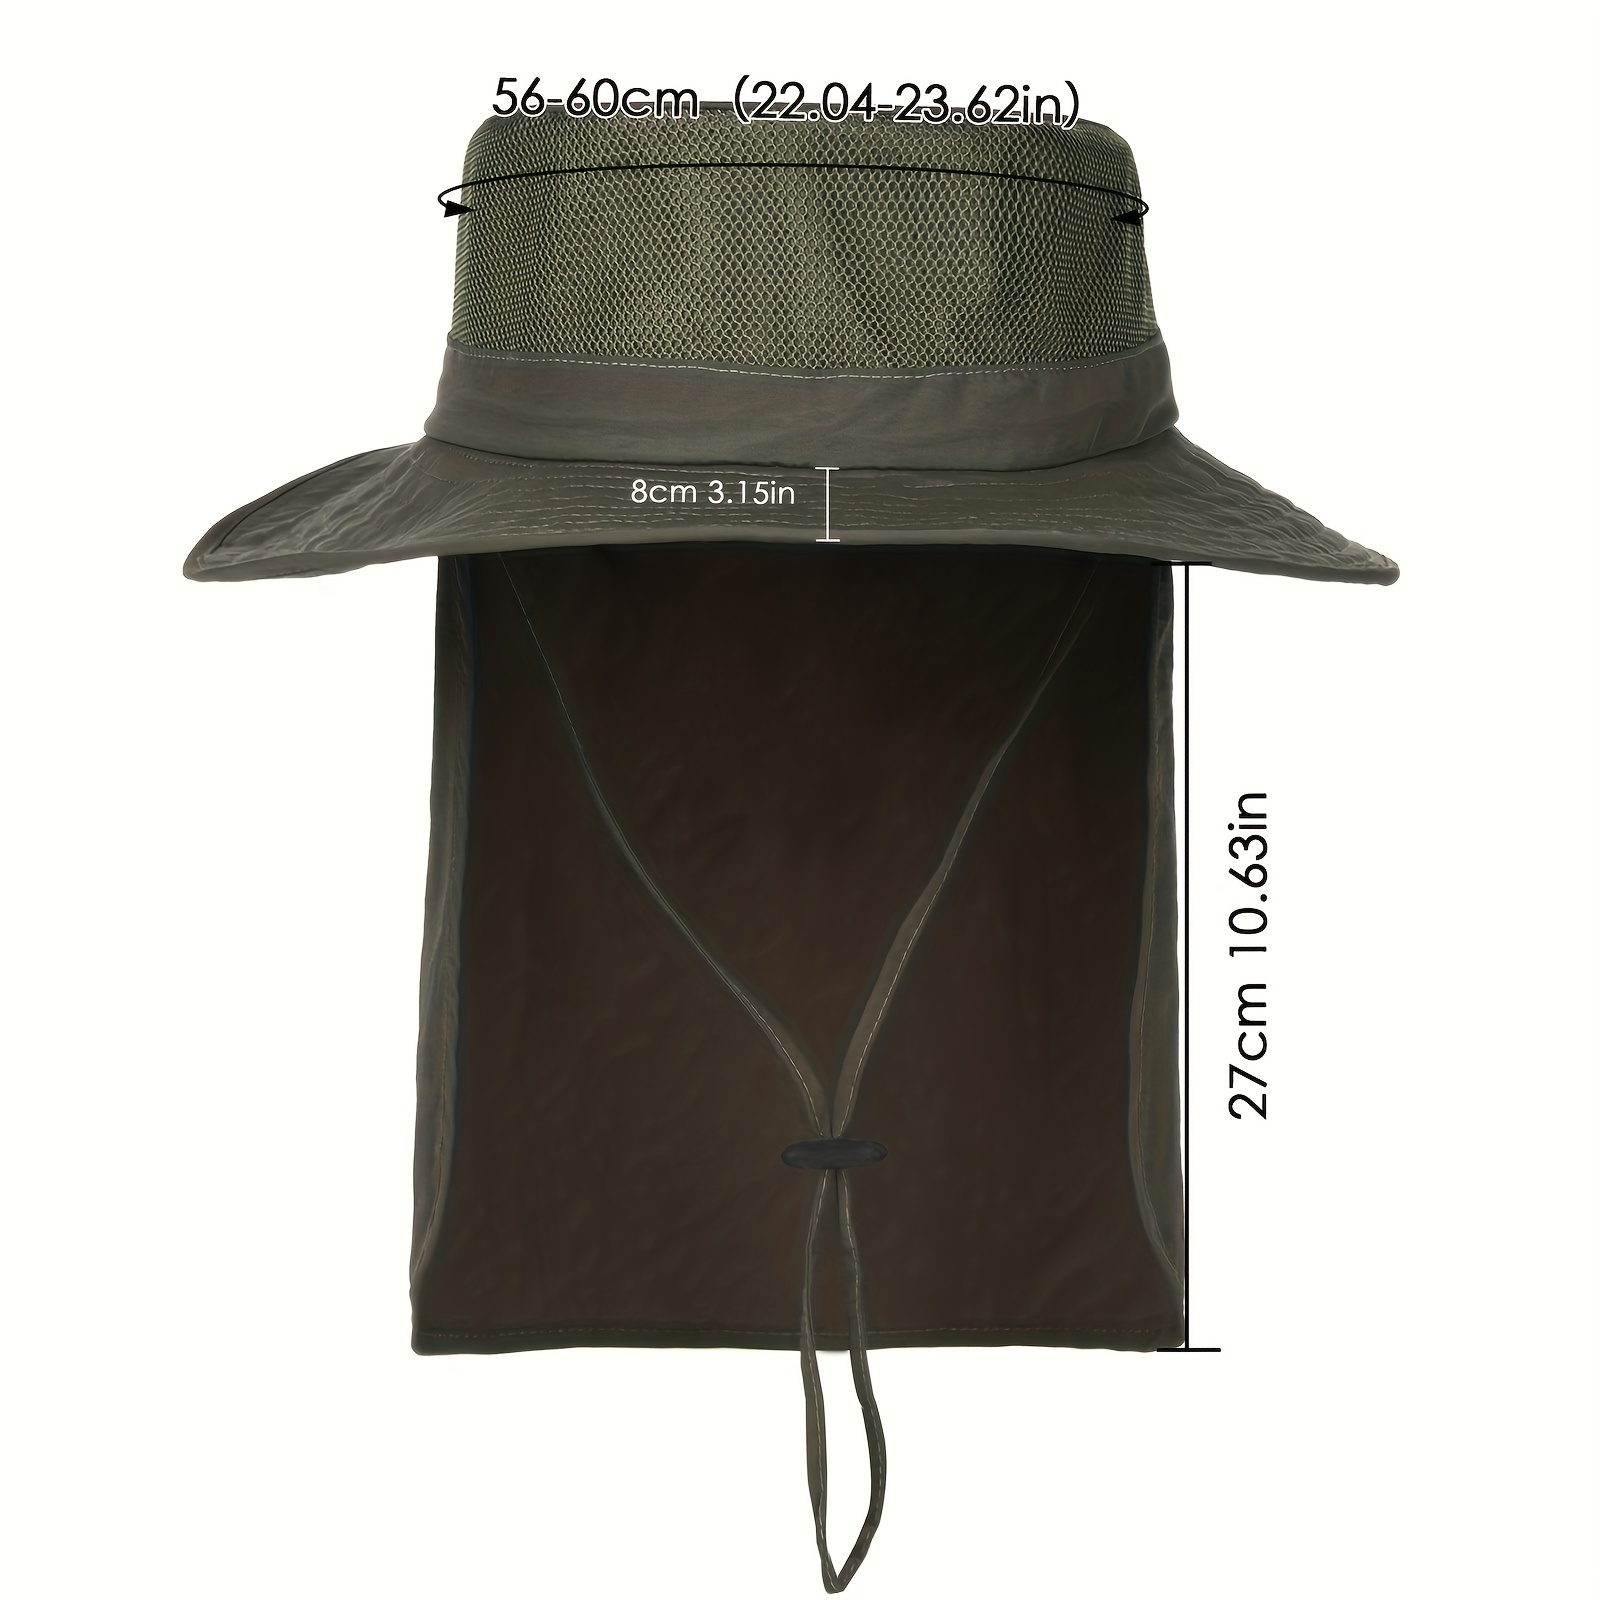 Camo Boonie Hats for Men and Women Foldable Bucket Hat for Fishing Hiking  Outdoor Summer Wide Brim Sun Hat UPF 50